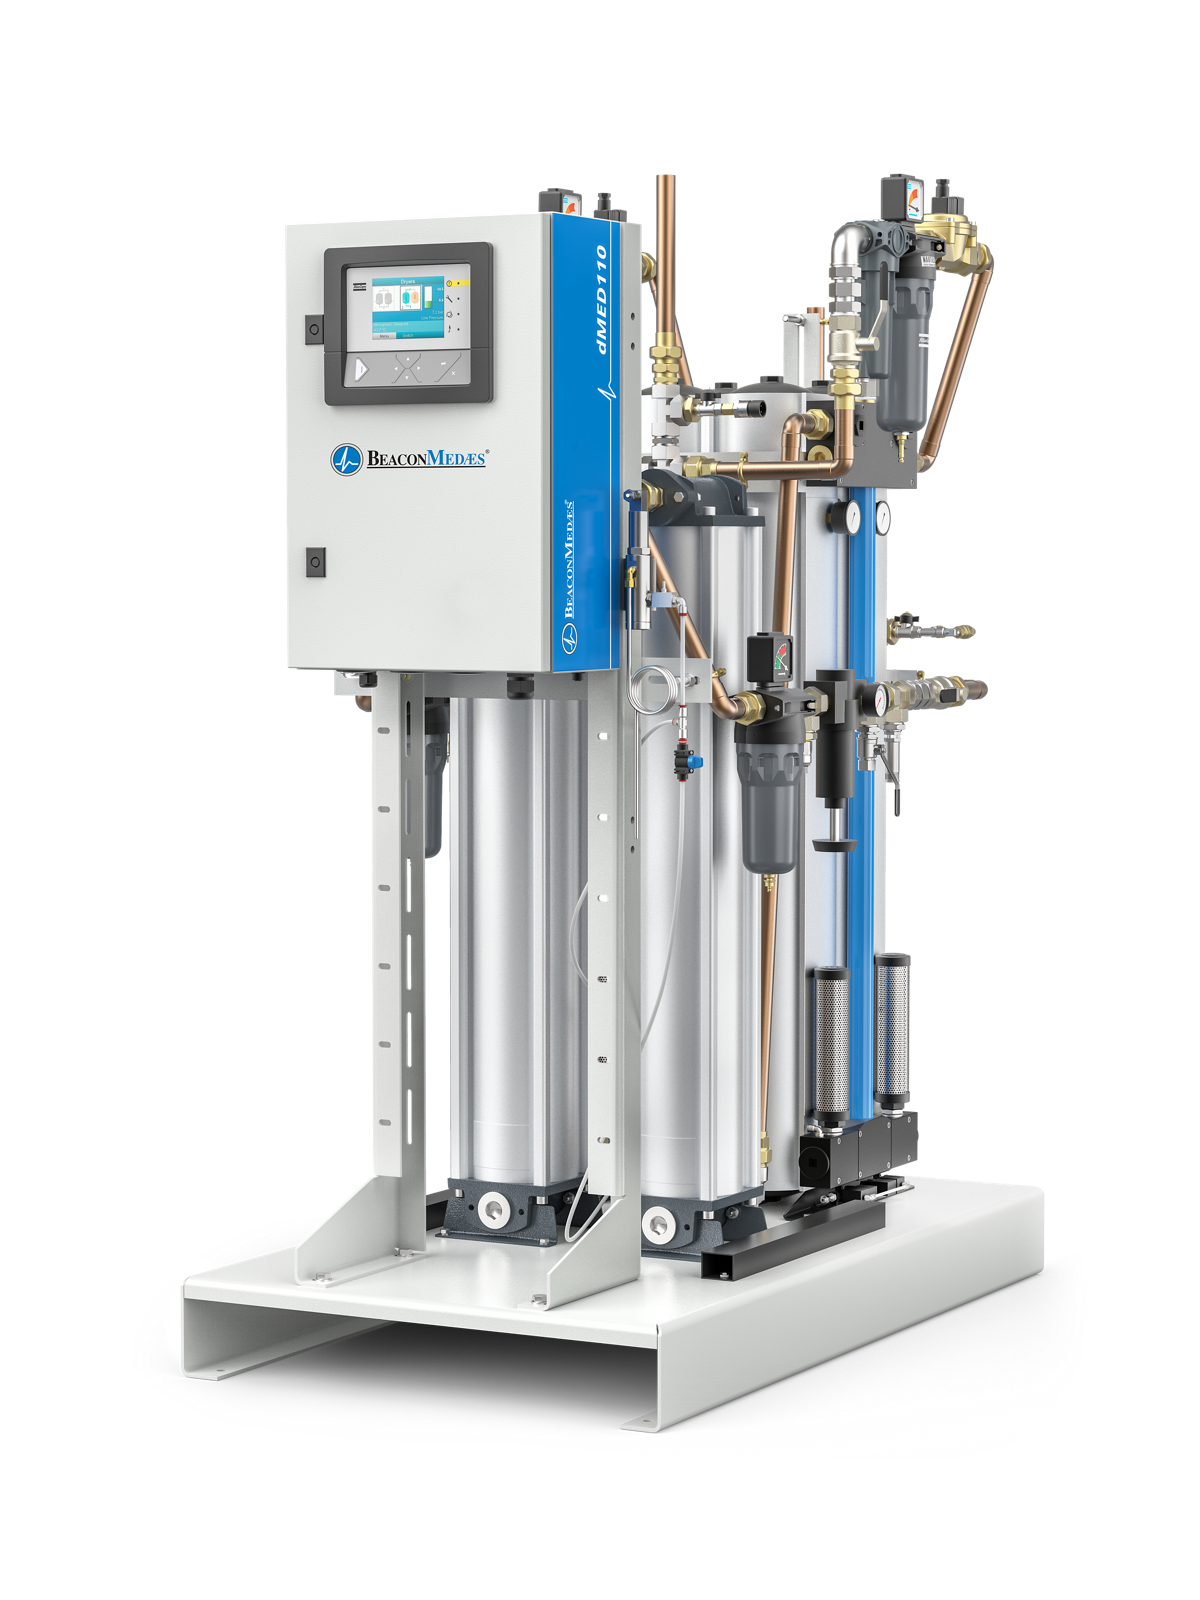 Suppliers of Medical Desiccant Air Dryers UK